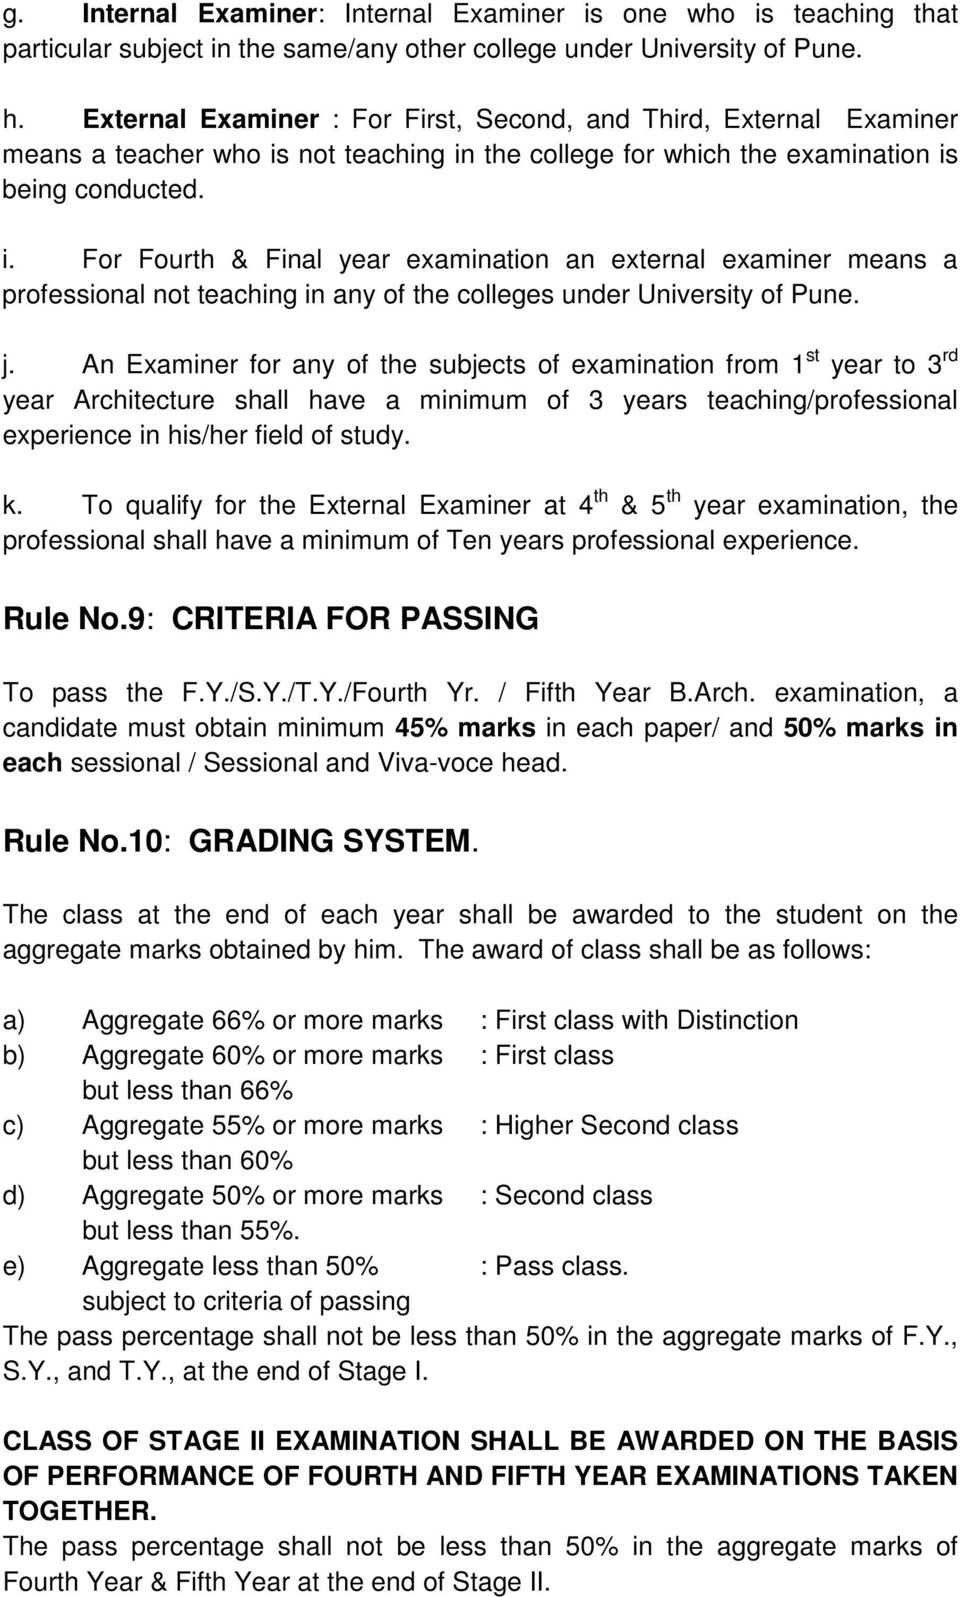 not teaching in the college for which the examination is being conducted. i. For Fourth & Final year examination an external examiner means a professional not teaching in any of the colleges under University of Pune.